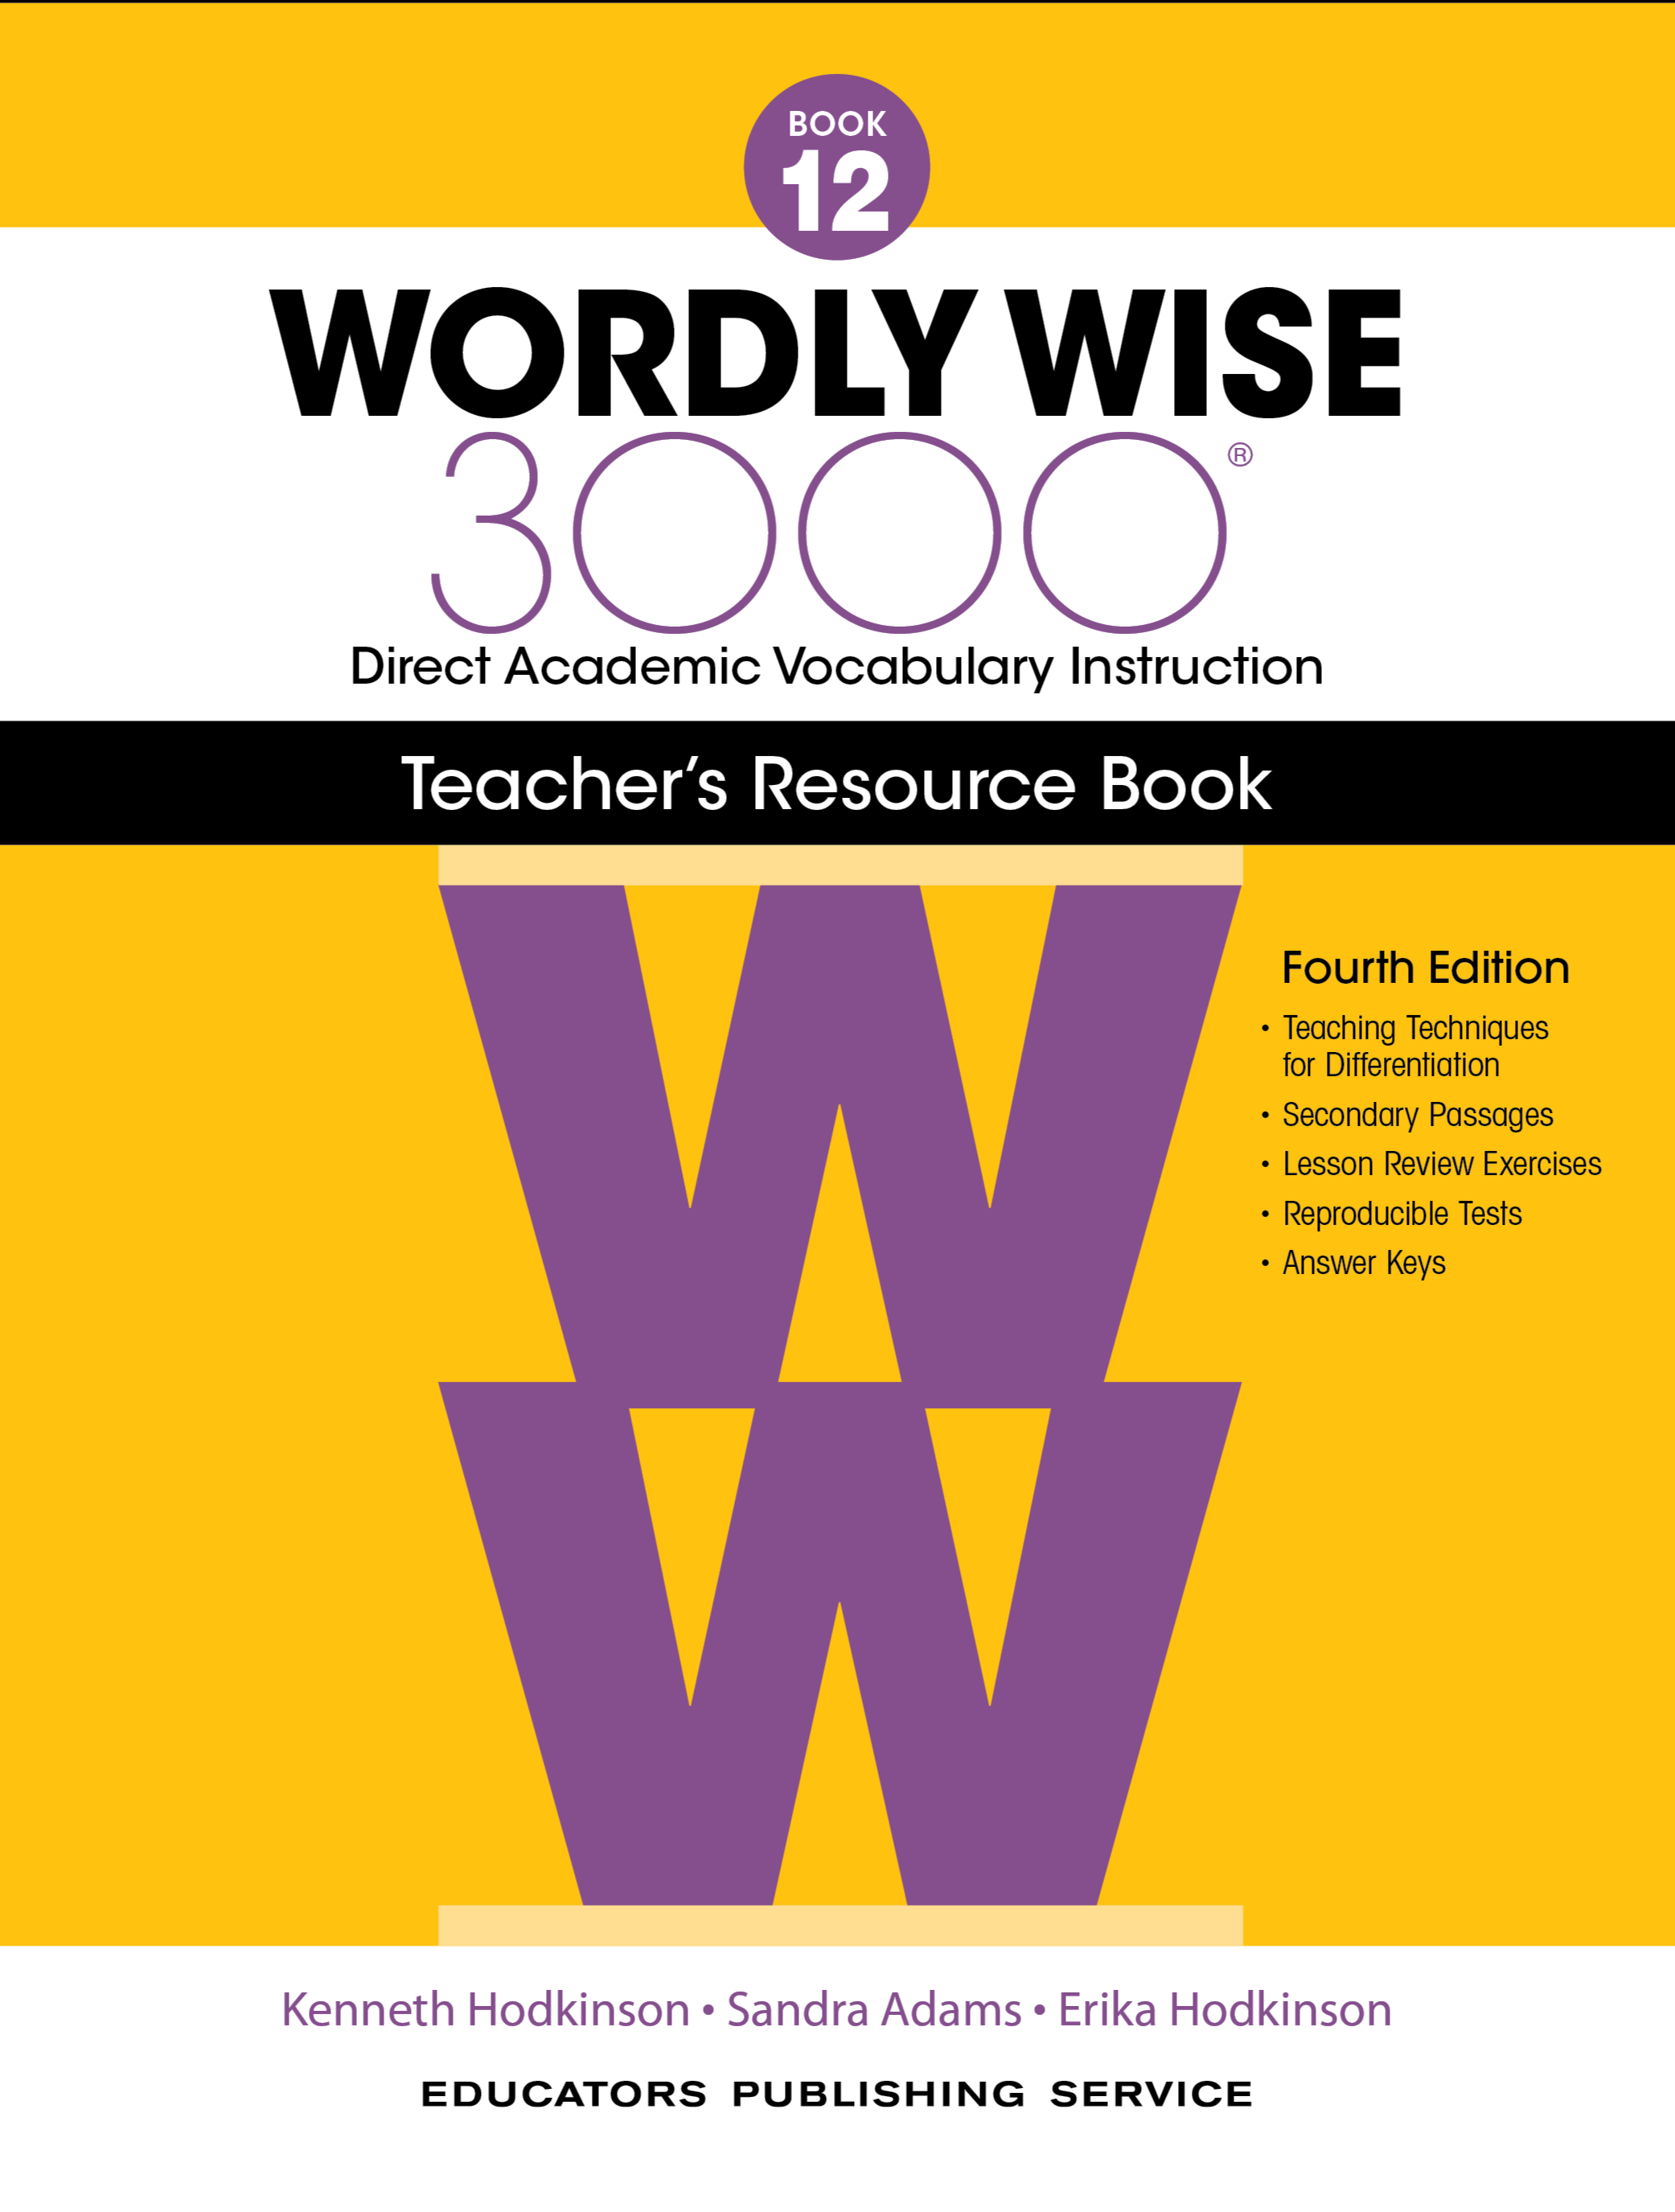 School　Books　4th　Book,　Resource　Home　12　Edition　3000　Wise　Wordly　Solid　Grade　Teacher